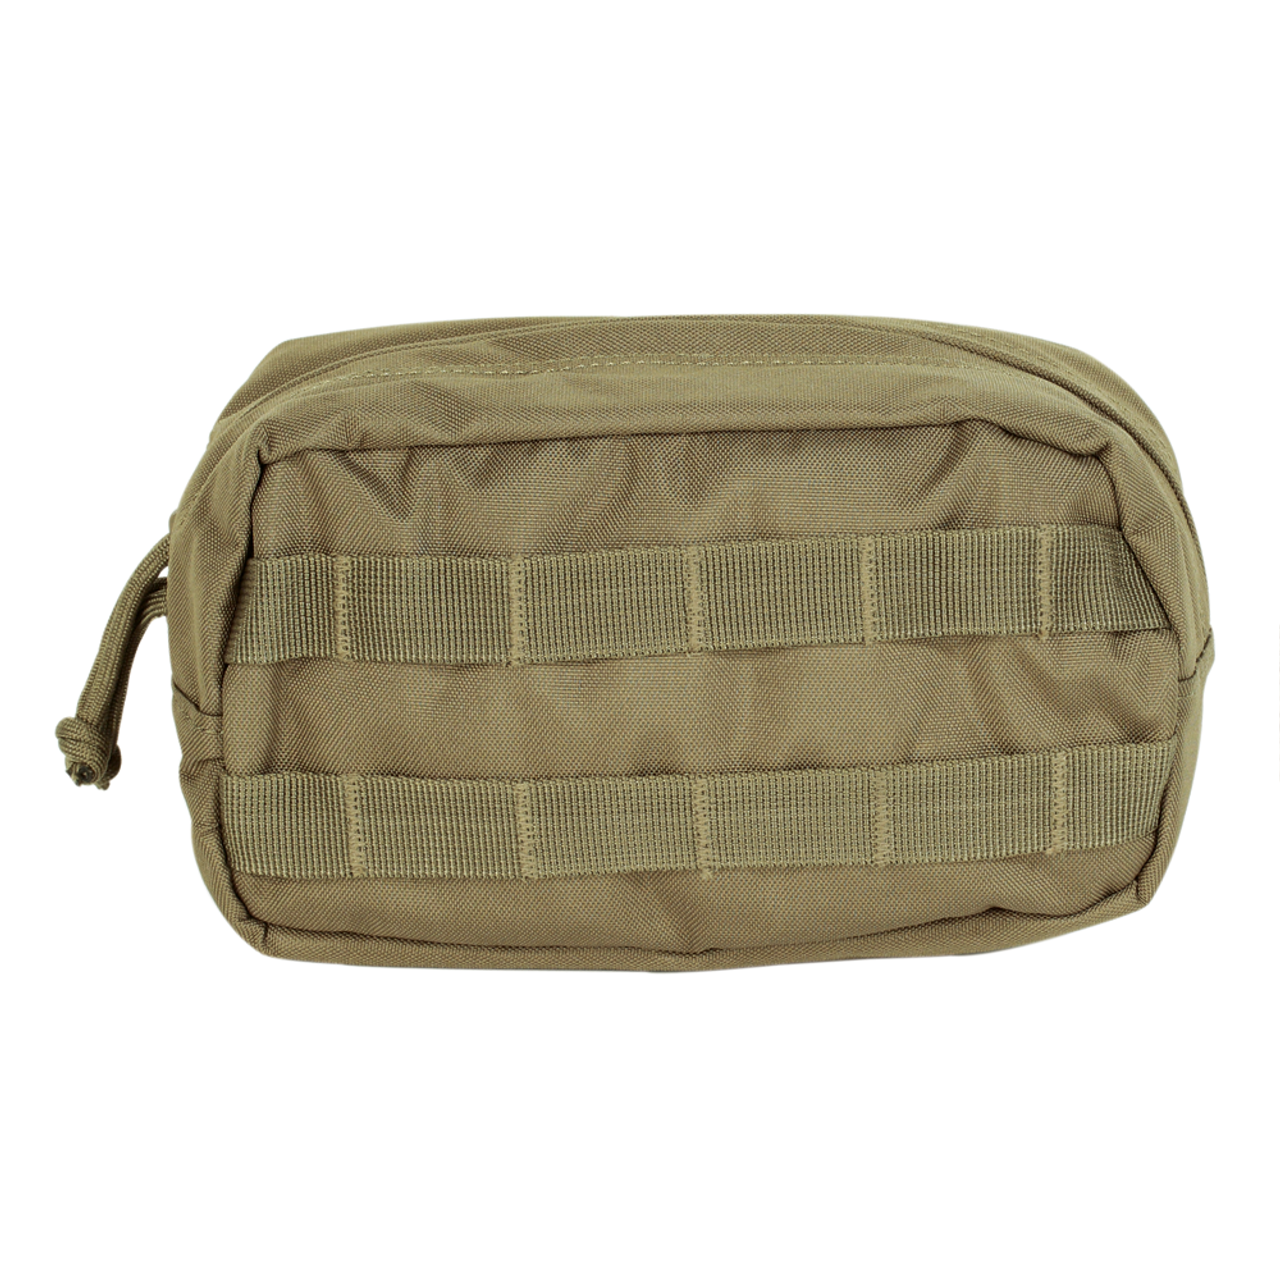 Travel Pouches - Voodoo Tactical Fully Covered Utility Pouch